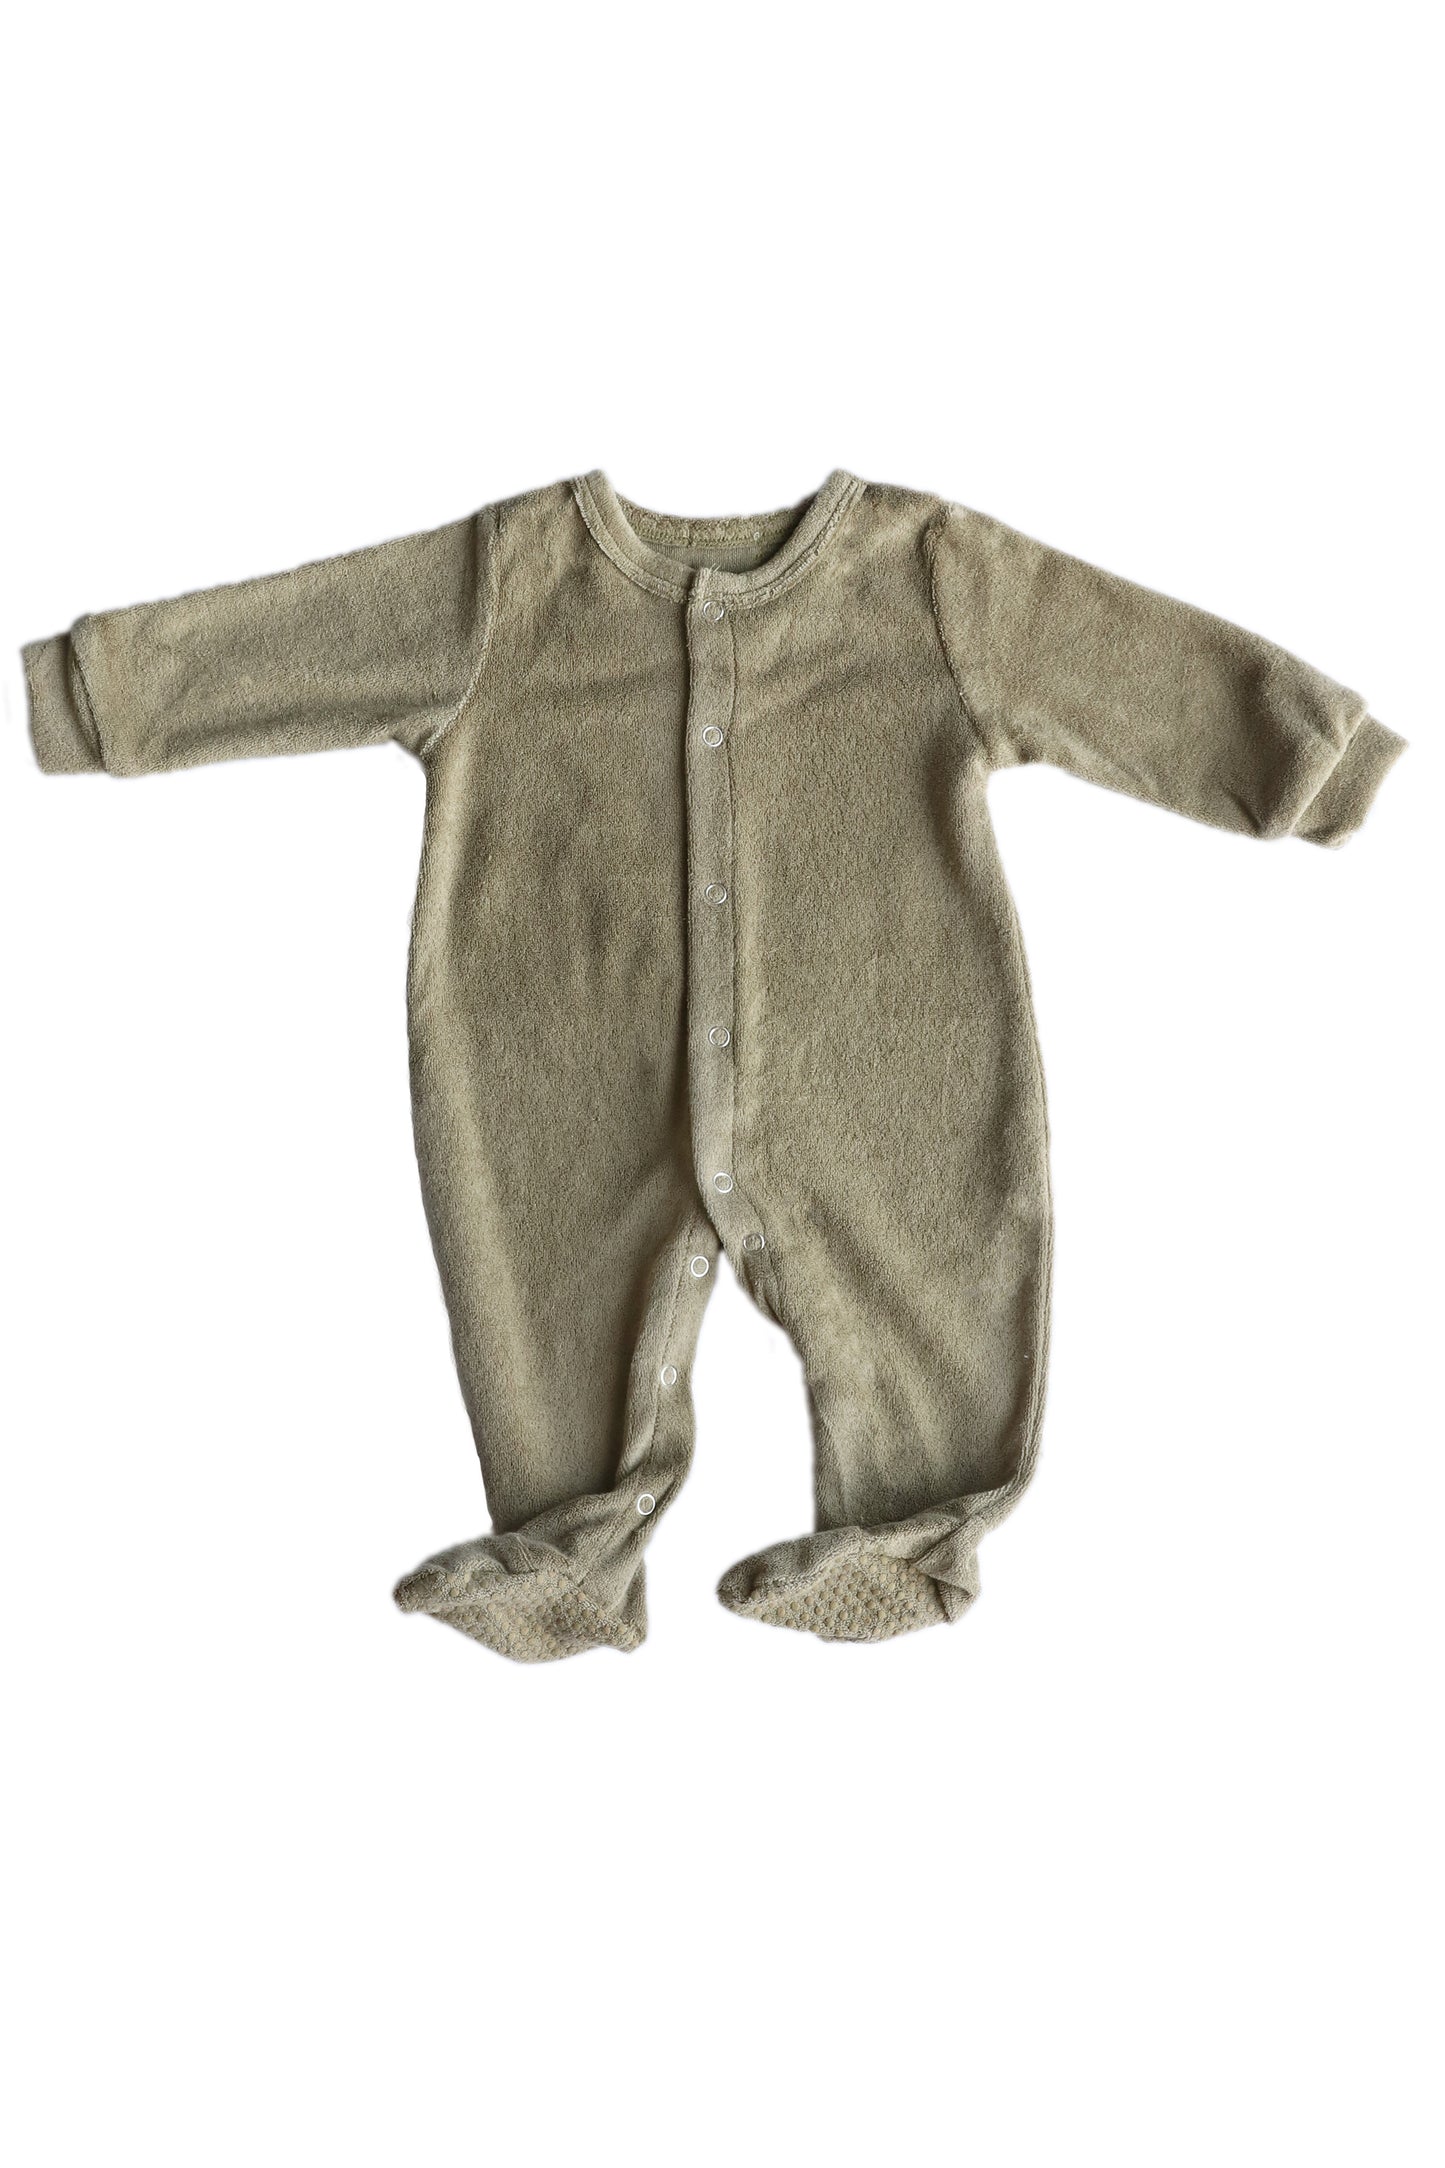 Terry Baby Sleeper  Gift shopping for infant essentials or creating a baby registry, you have found the best neutral tone unisex 100% cotton terry towel sleepsuit onesie. 